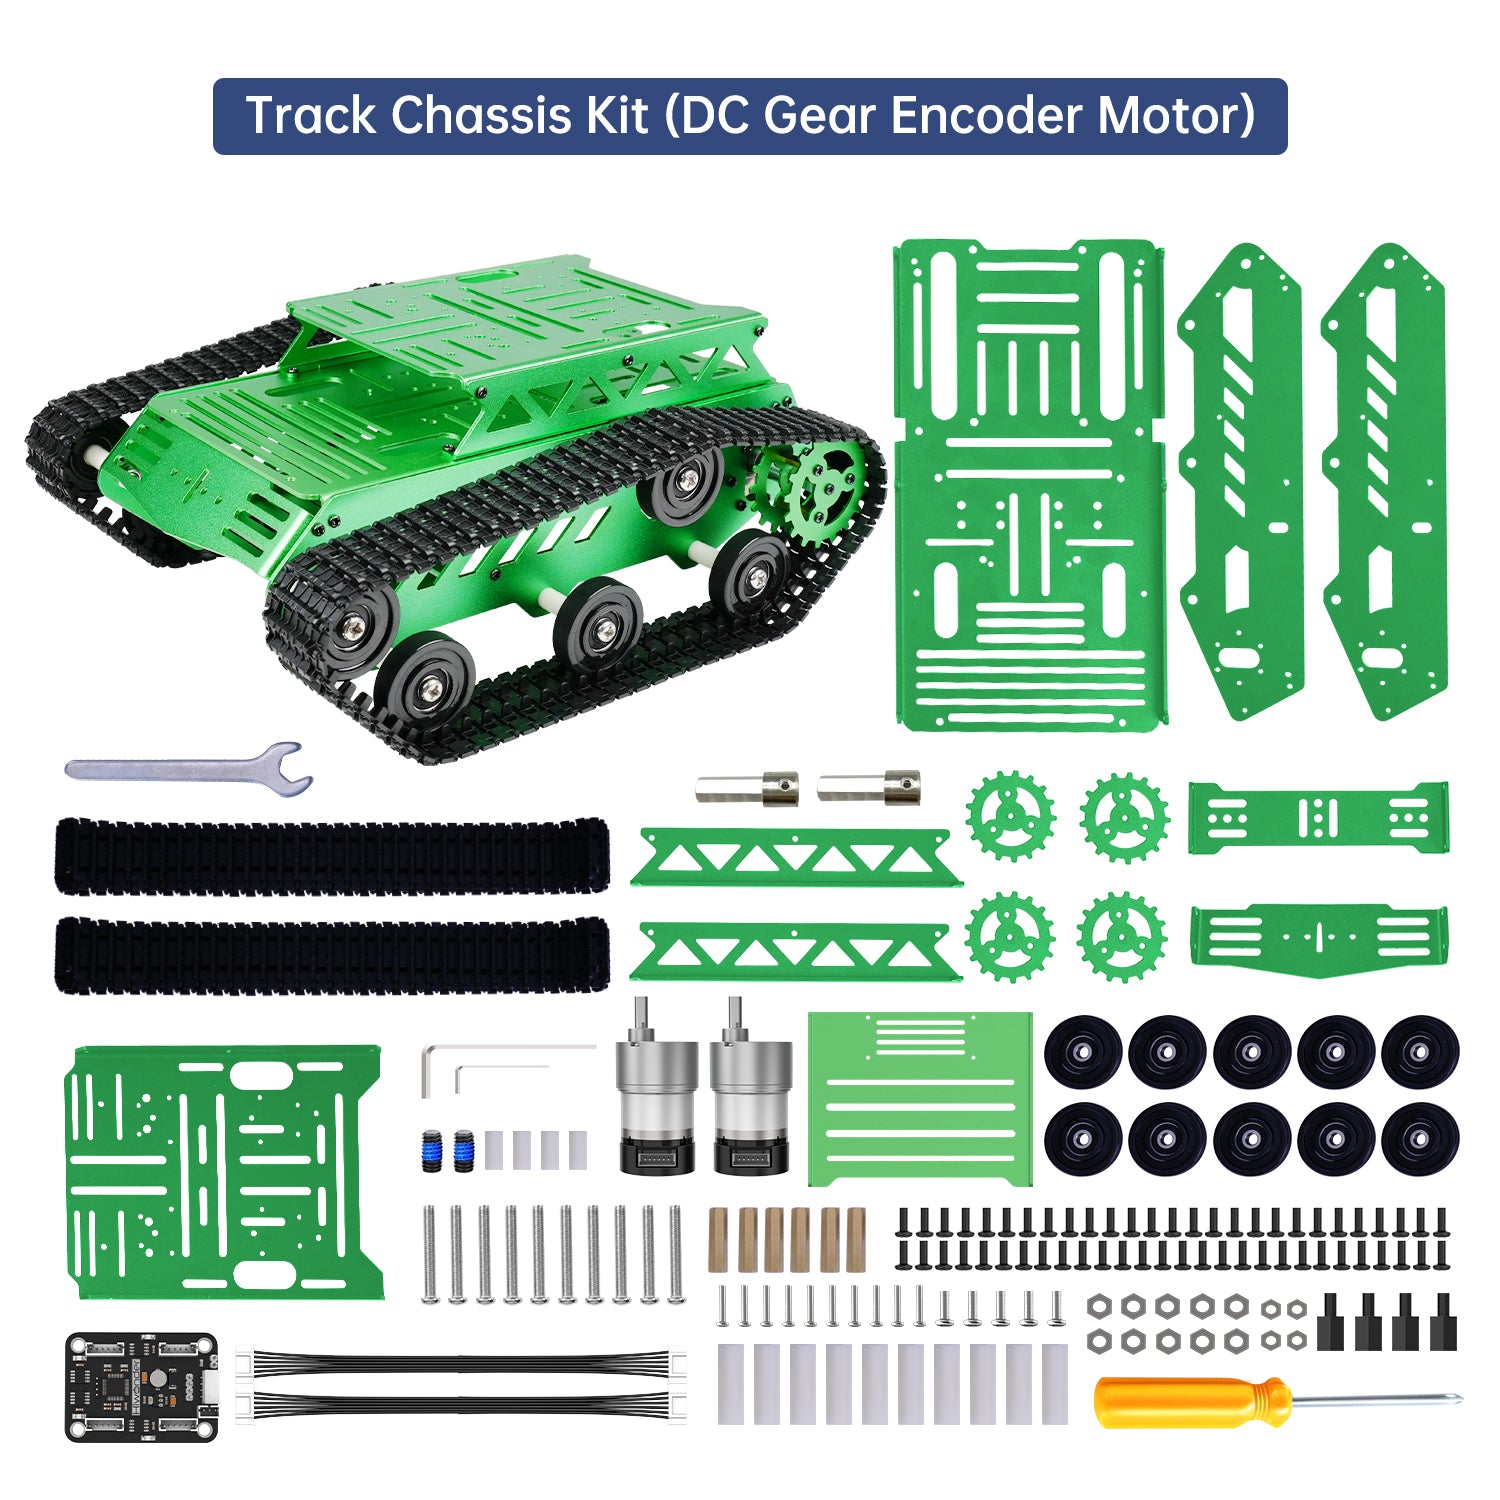 Hiwonder Tank Car Chassis Kit Shock Absorbing Robot with DC Geared Motor for Arduino/ Raspberry Pi/ Jetson Nano DIY Robotic Car Learning Kit (Green)